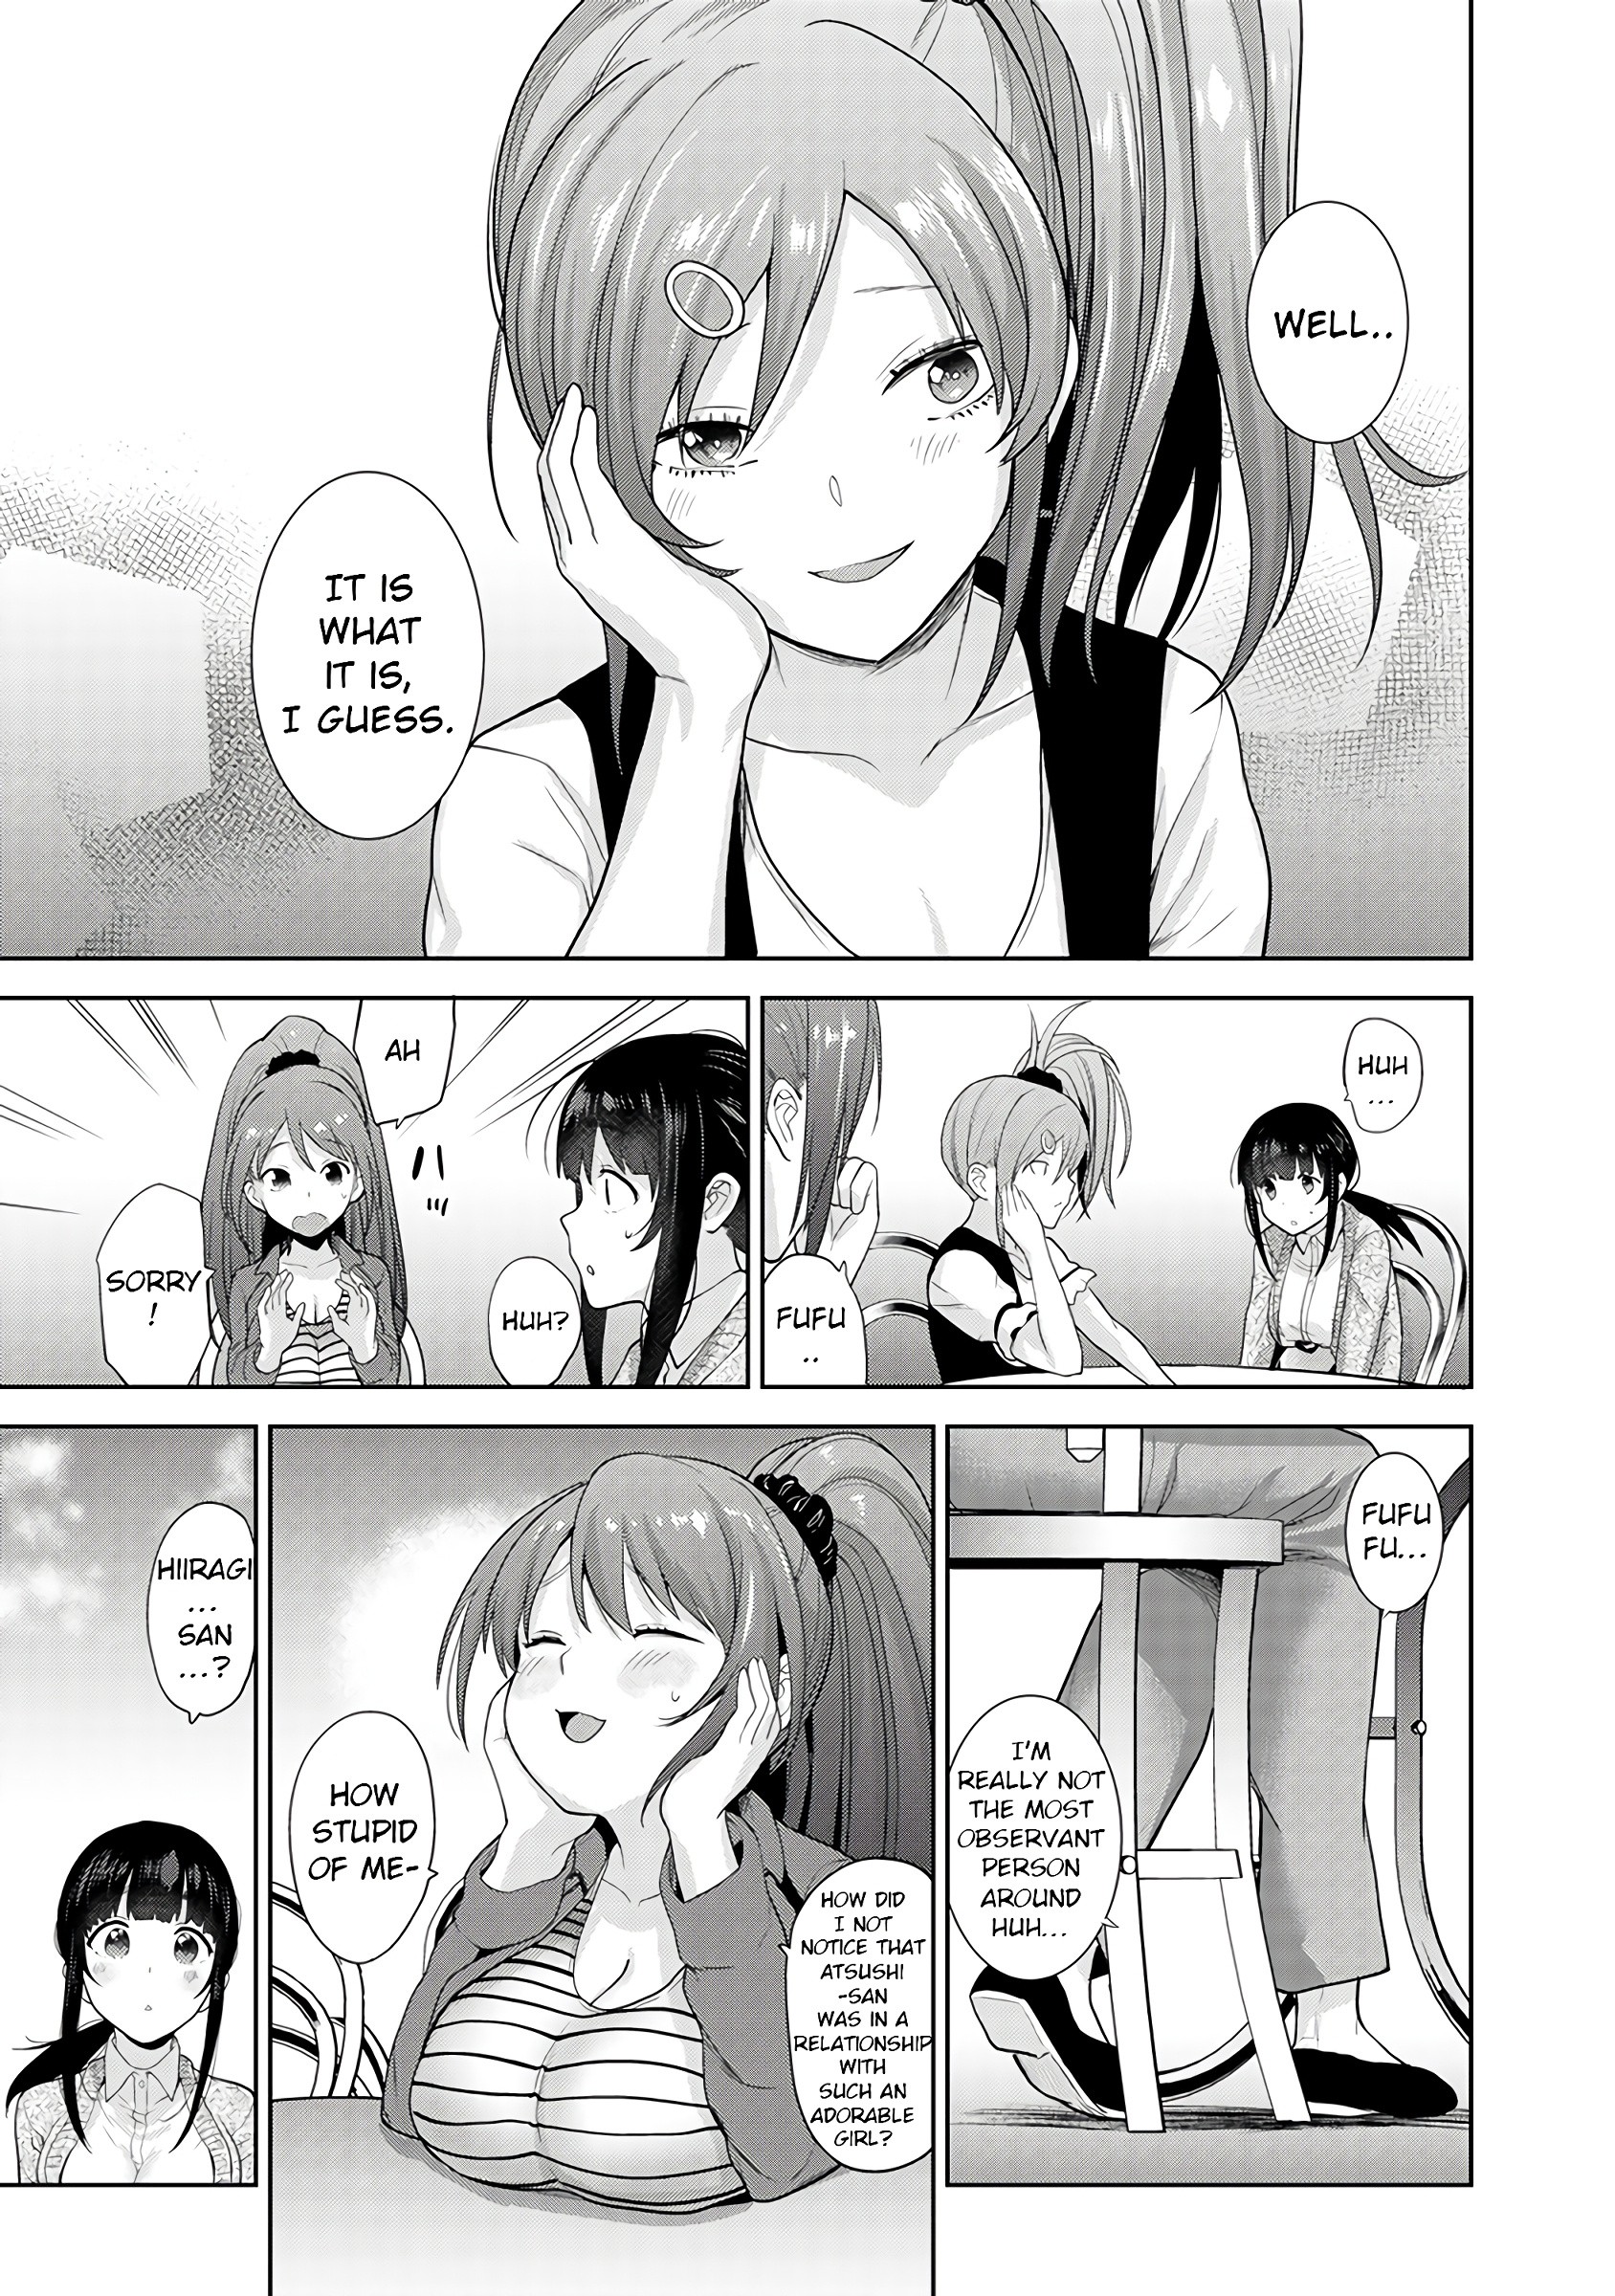 Method to Catch a Pretty Girl 9 hentai manga picture 15